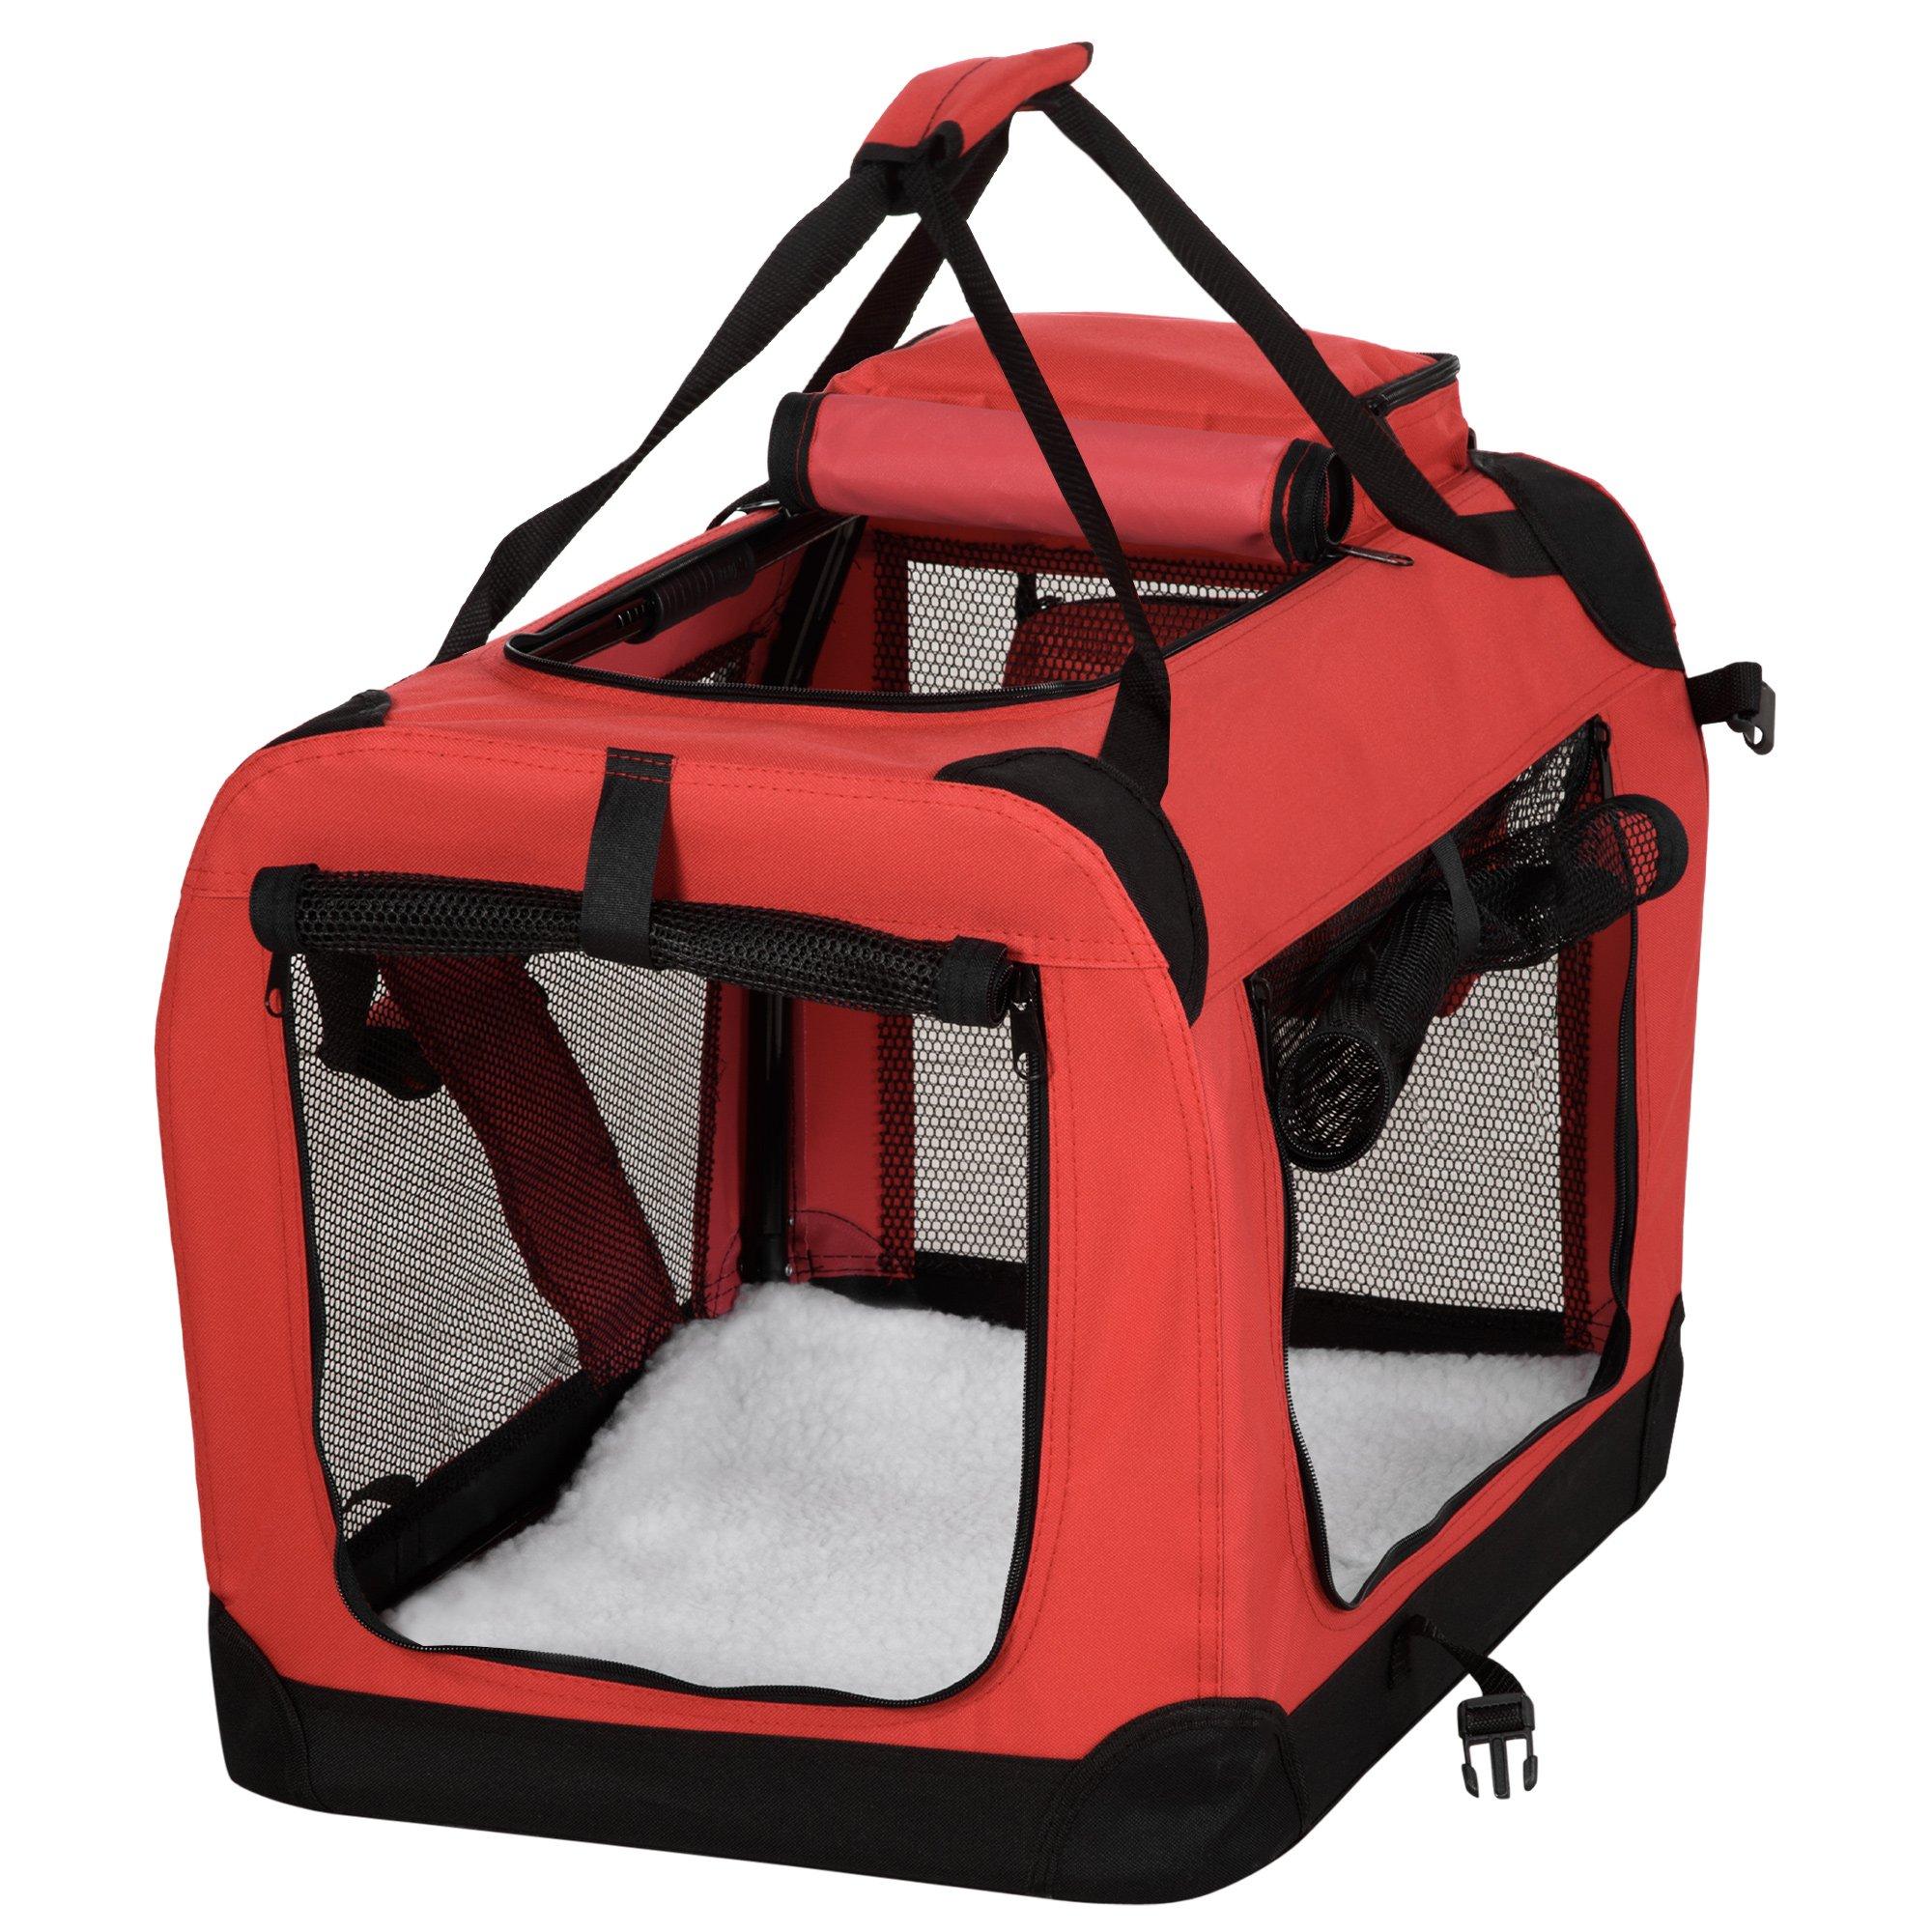 60cm Foldable Pet Carrier, Soft Side Pet Travel Crate for Small Mini